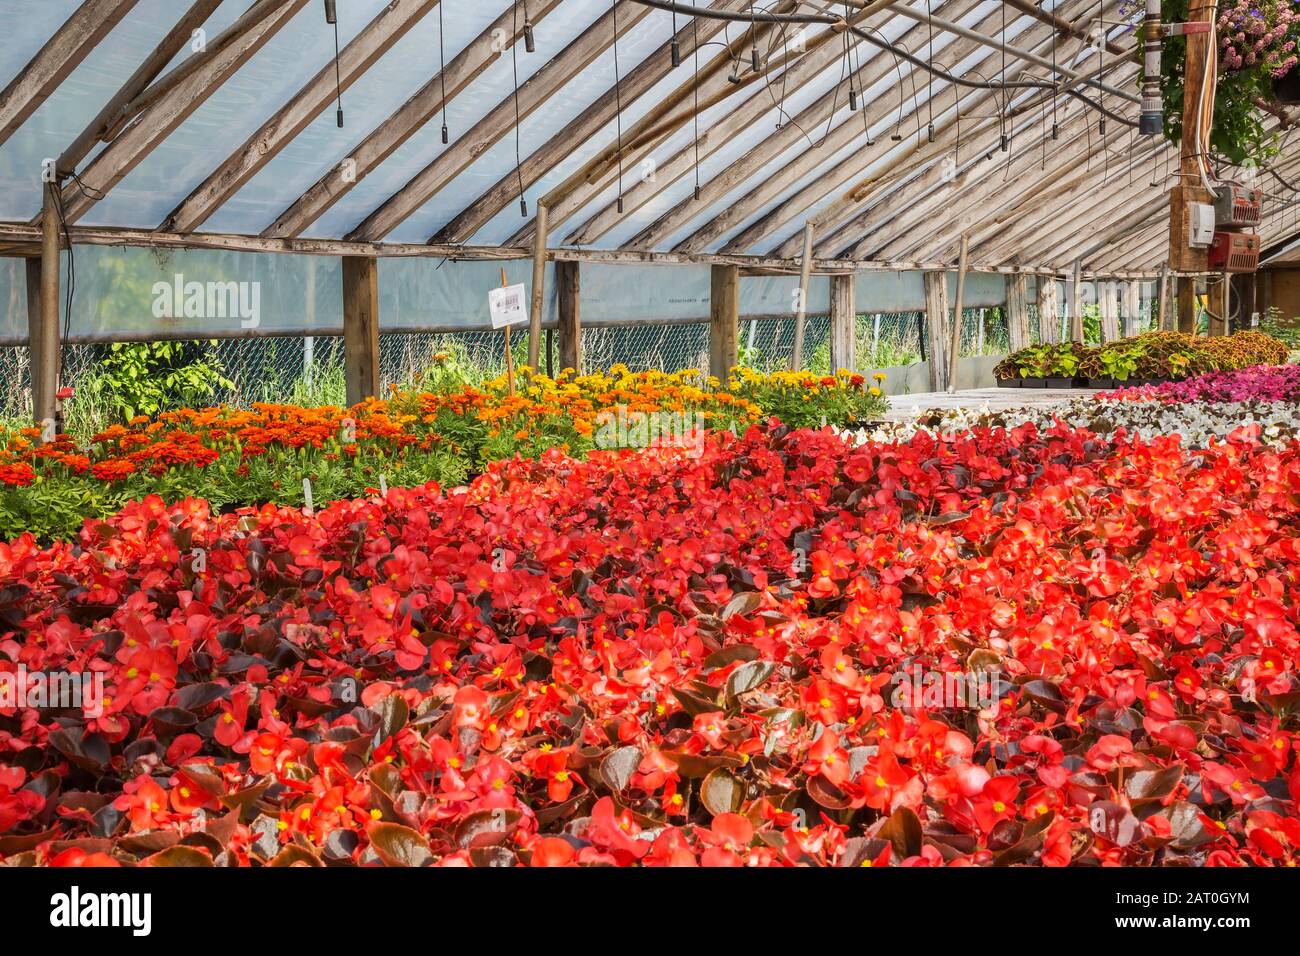 Red, white and pink Begonia, orange, yellow Tagetes - Marigold  flowers being grown organically in containers inside polyethylene film greenhouse. Stock Photo